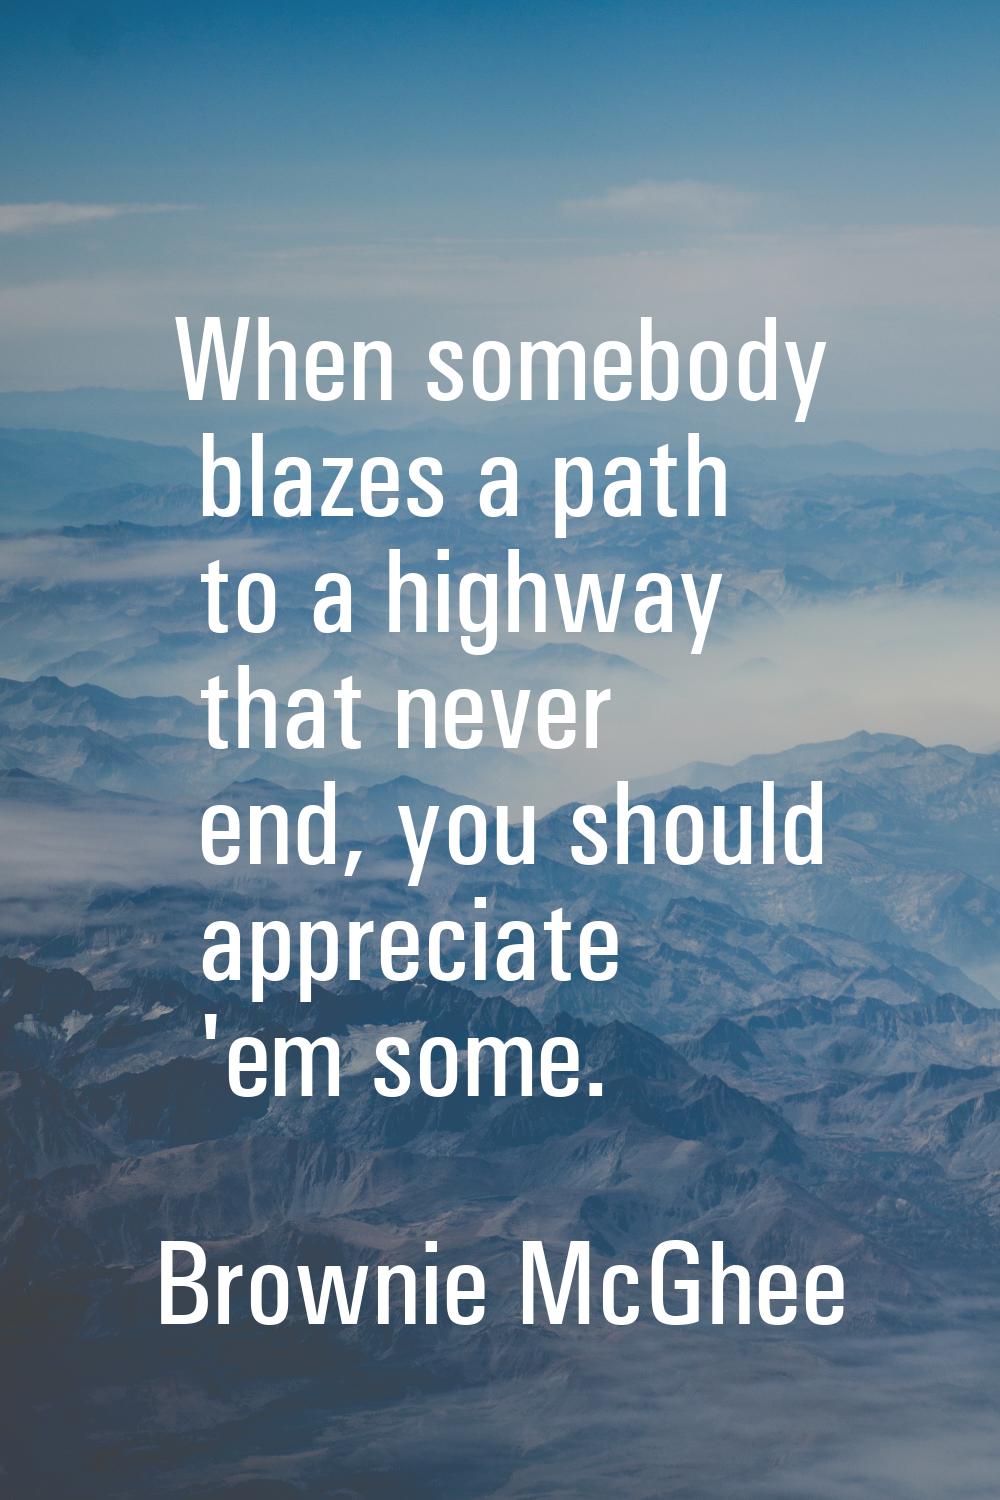 When somebody blazes a path to a highway that never end, you should appreciate 'em some.